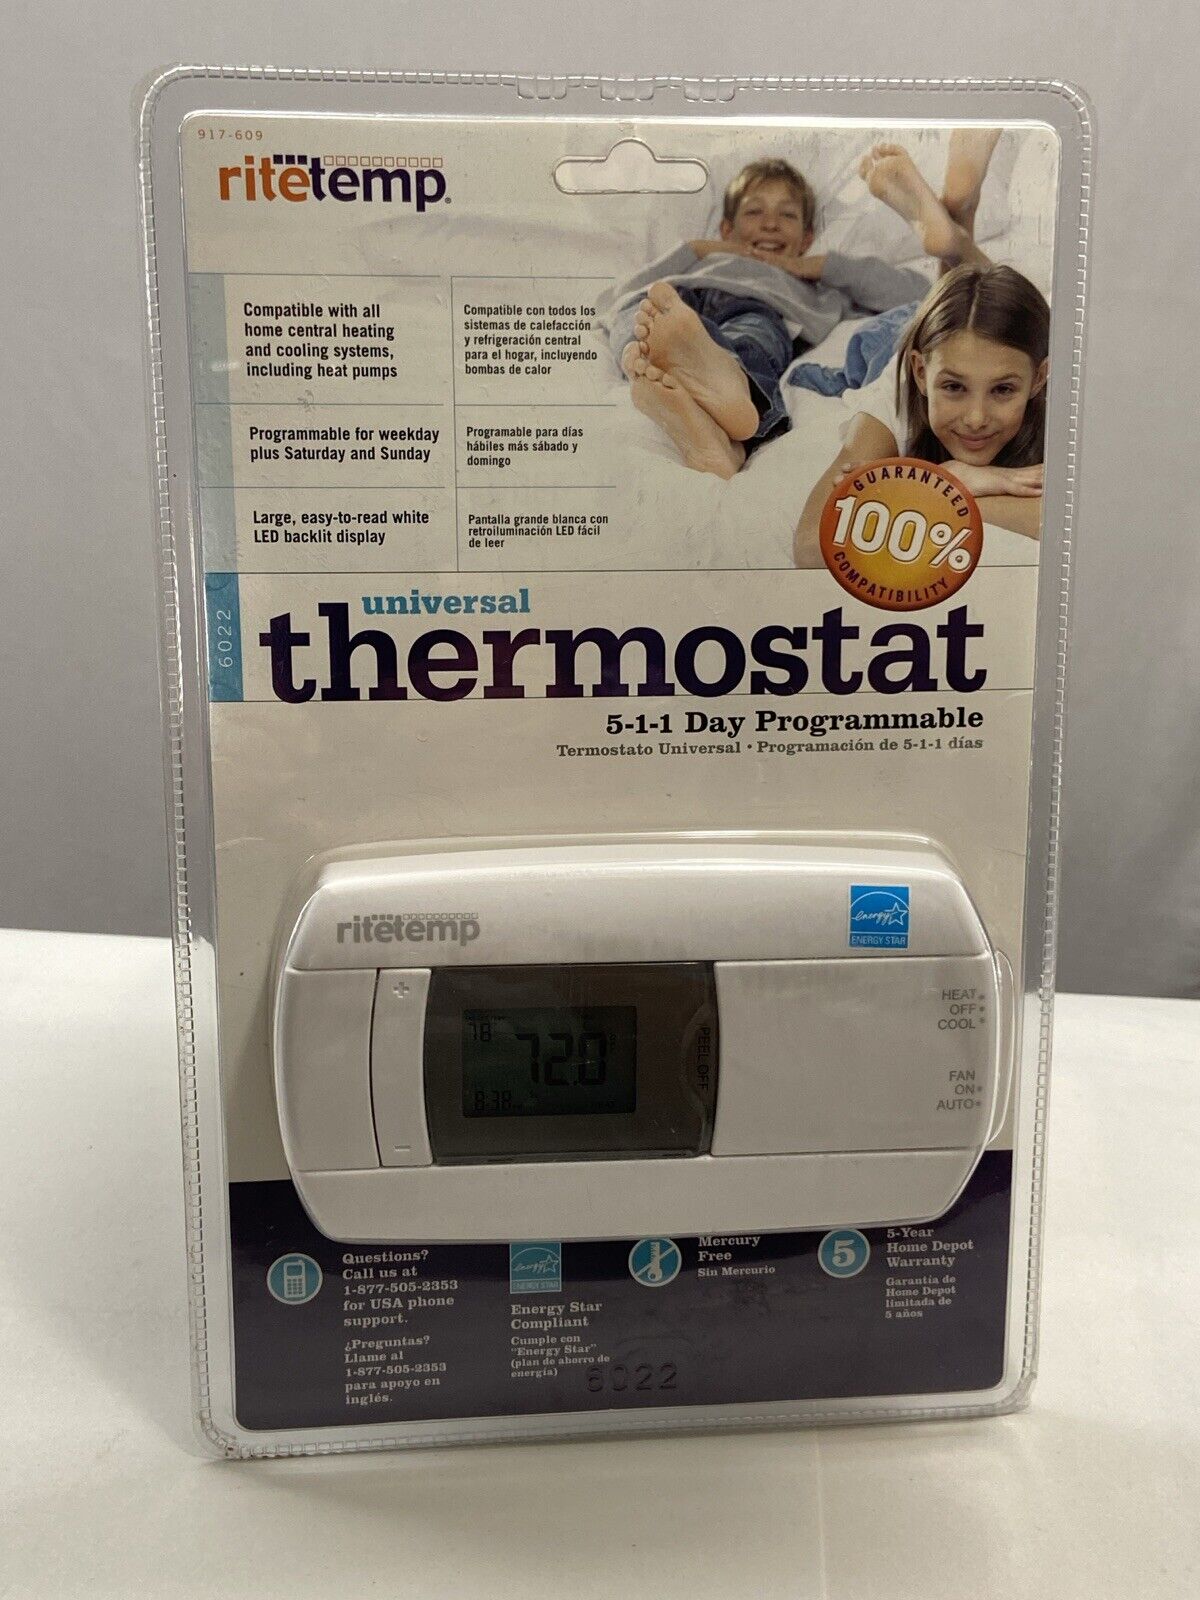 Ritetemp Universal Thermostat 5-1-1 Day Programmable #6022 Central Heat-Cool-Fan